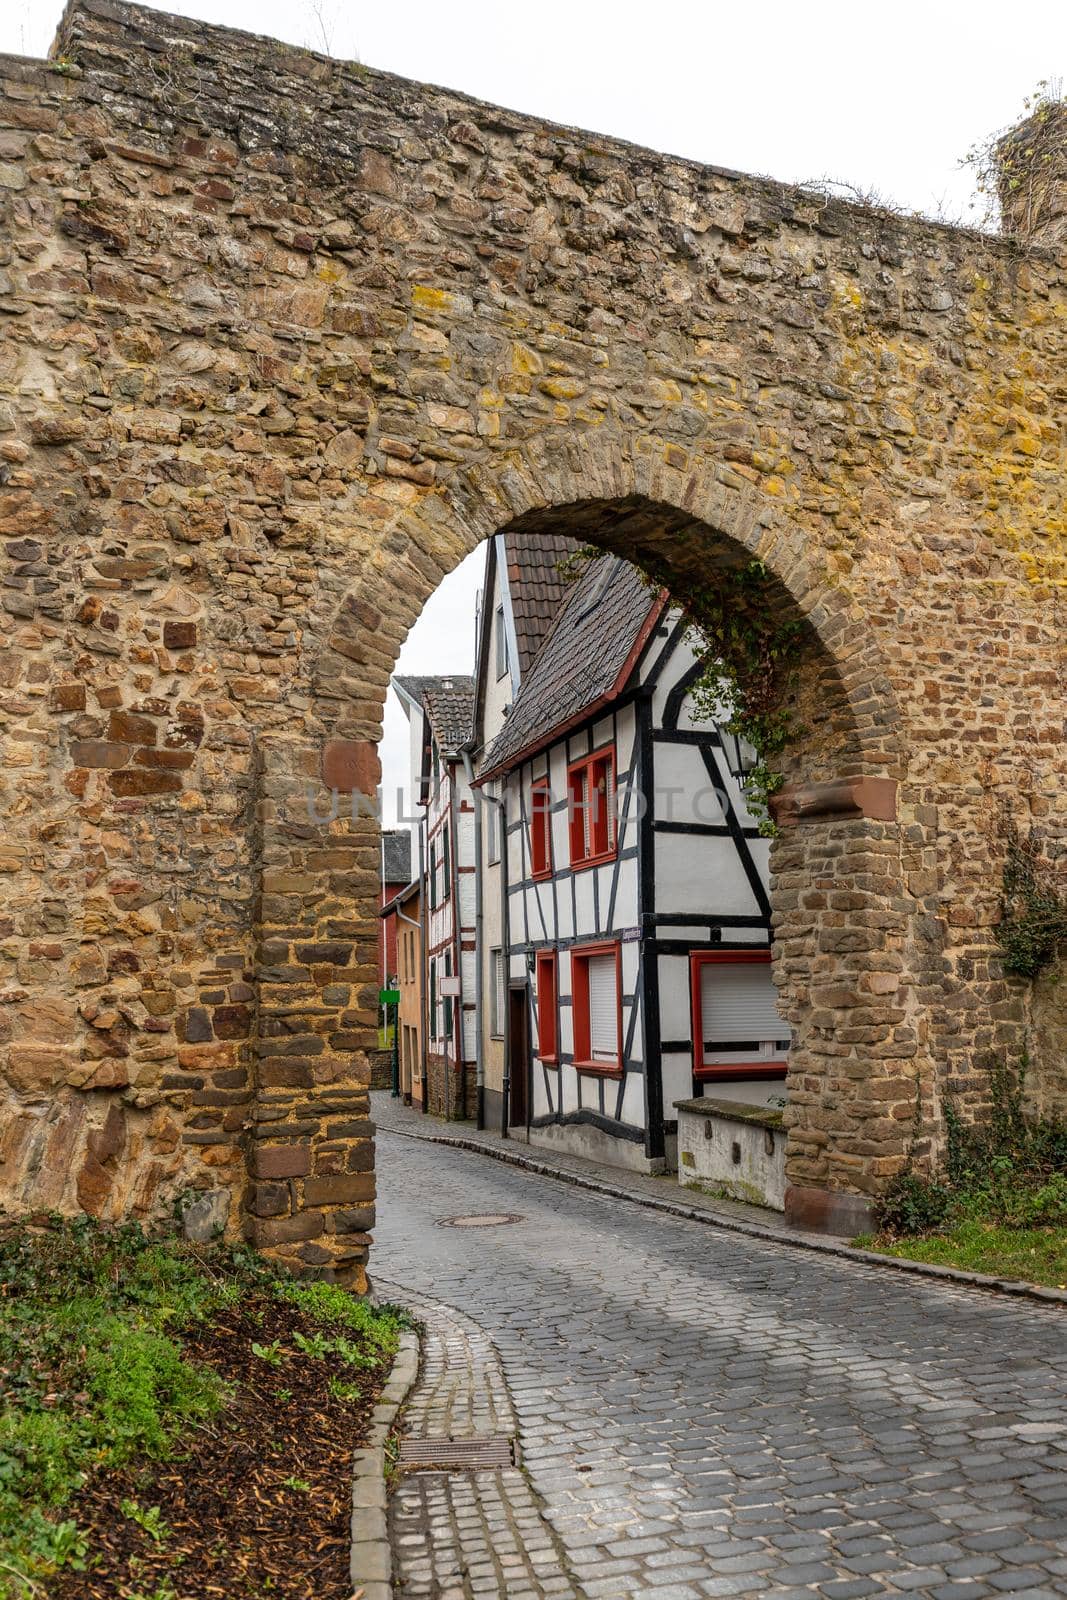 Archway of the historic city wall in Bad Muenstereifel by reinerc